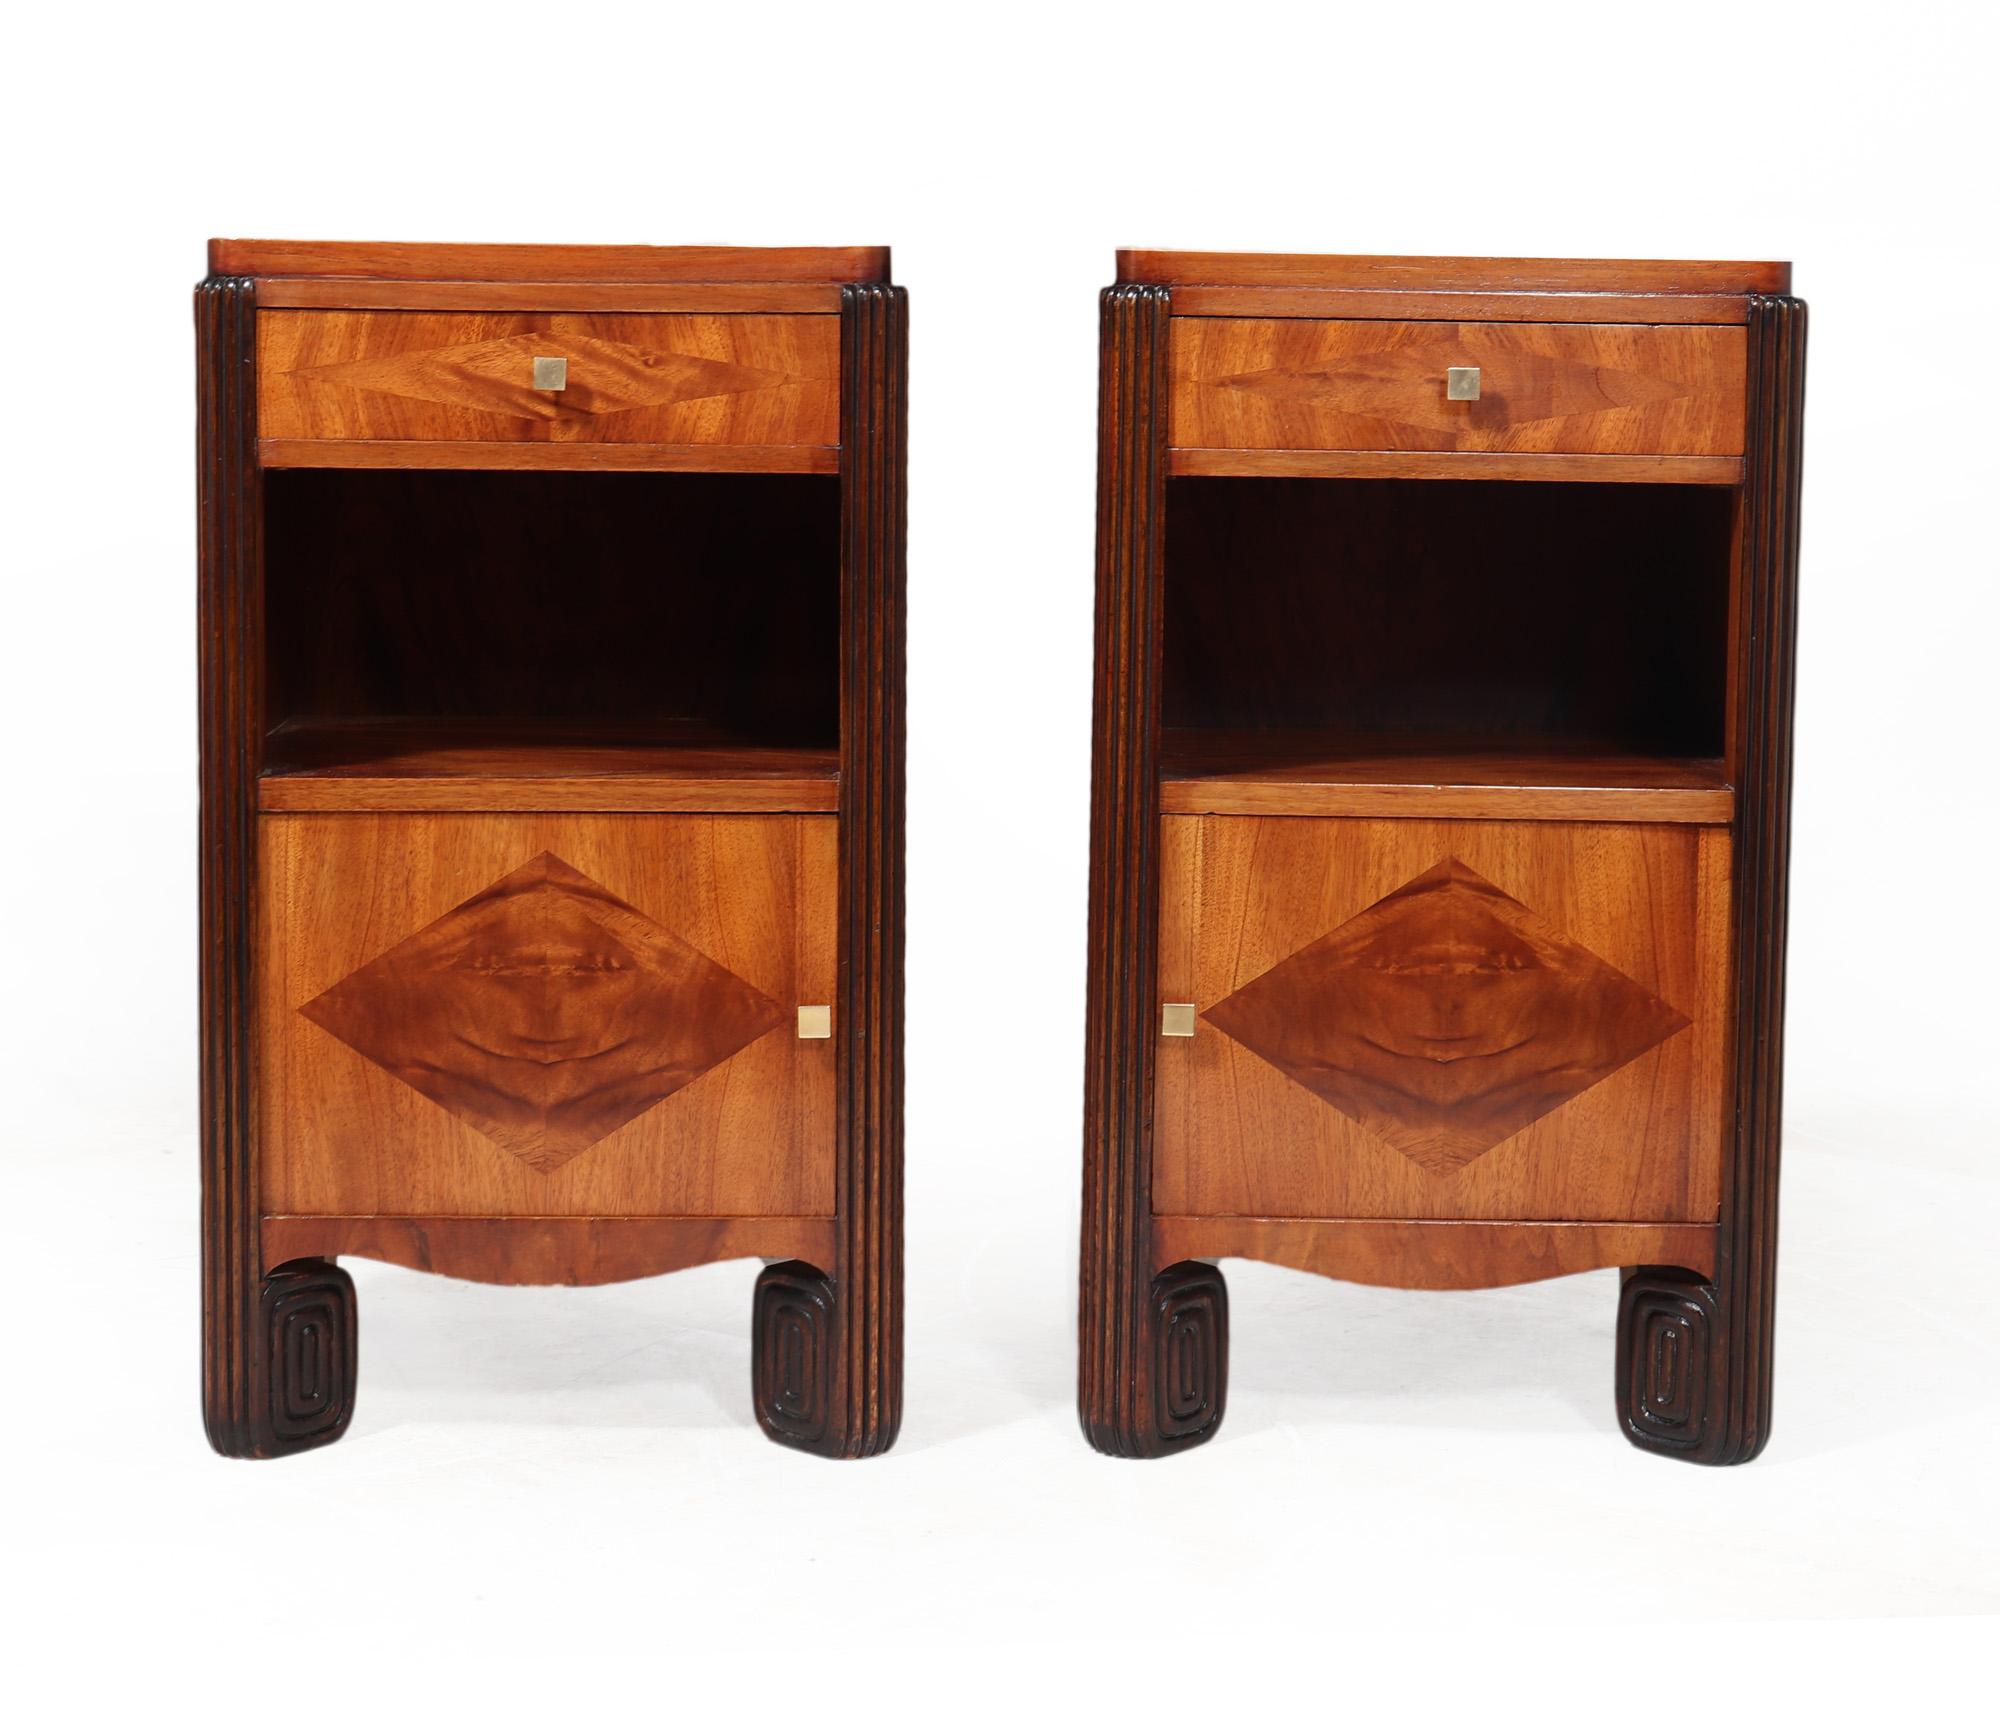 BEDSIDE CABINETS - MICHEL DUFET
An exceptional and rare pair of bedside cabinets by Michel Dufet, produced in France in c1925, in walnut on Oak, having inlayed contrasting walnut in diamond form, reeded leg uprights single drawer above open shelf